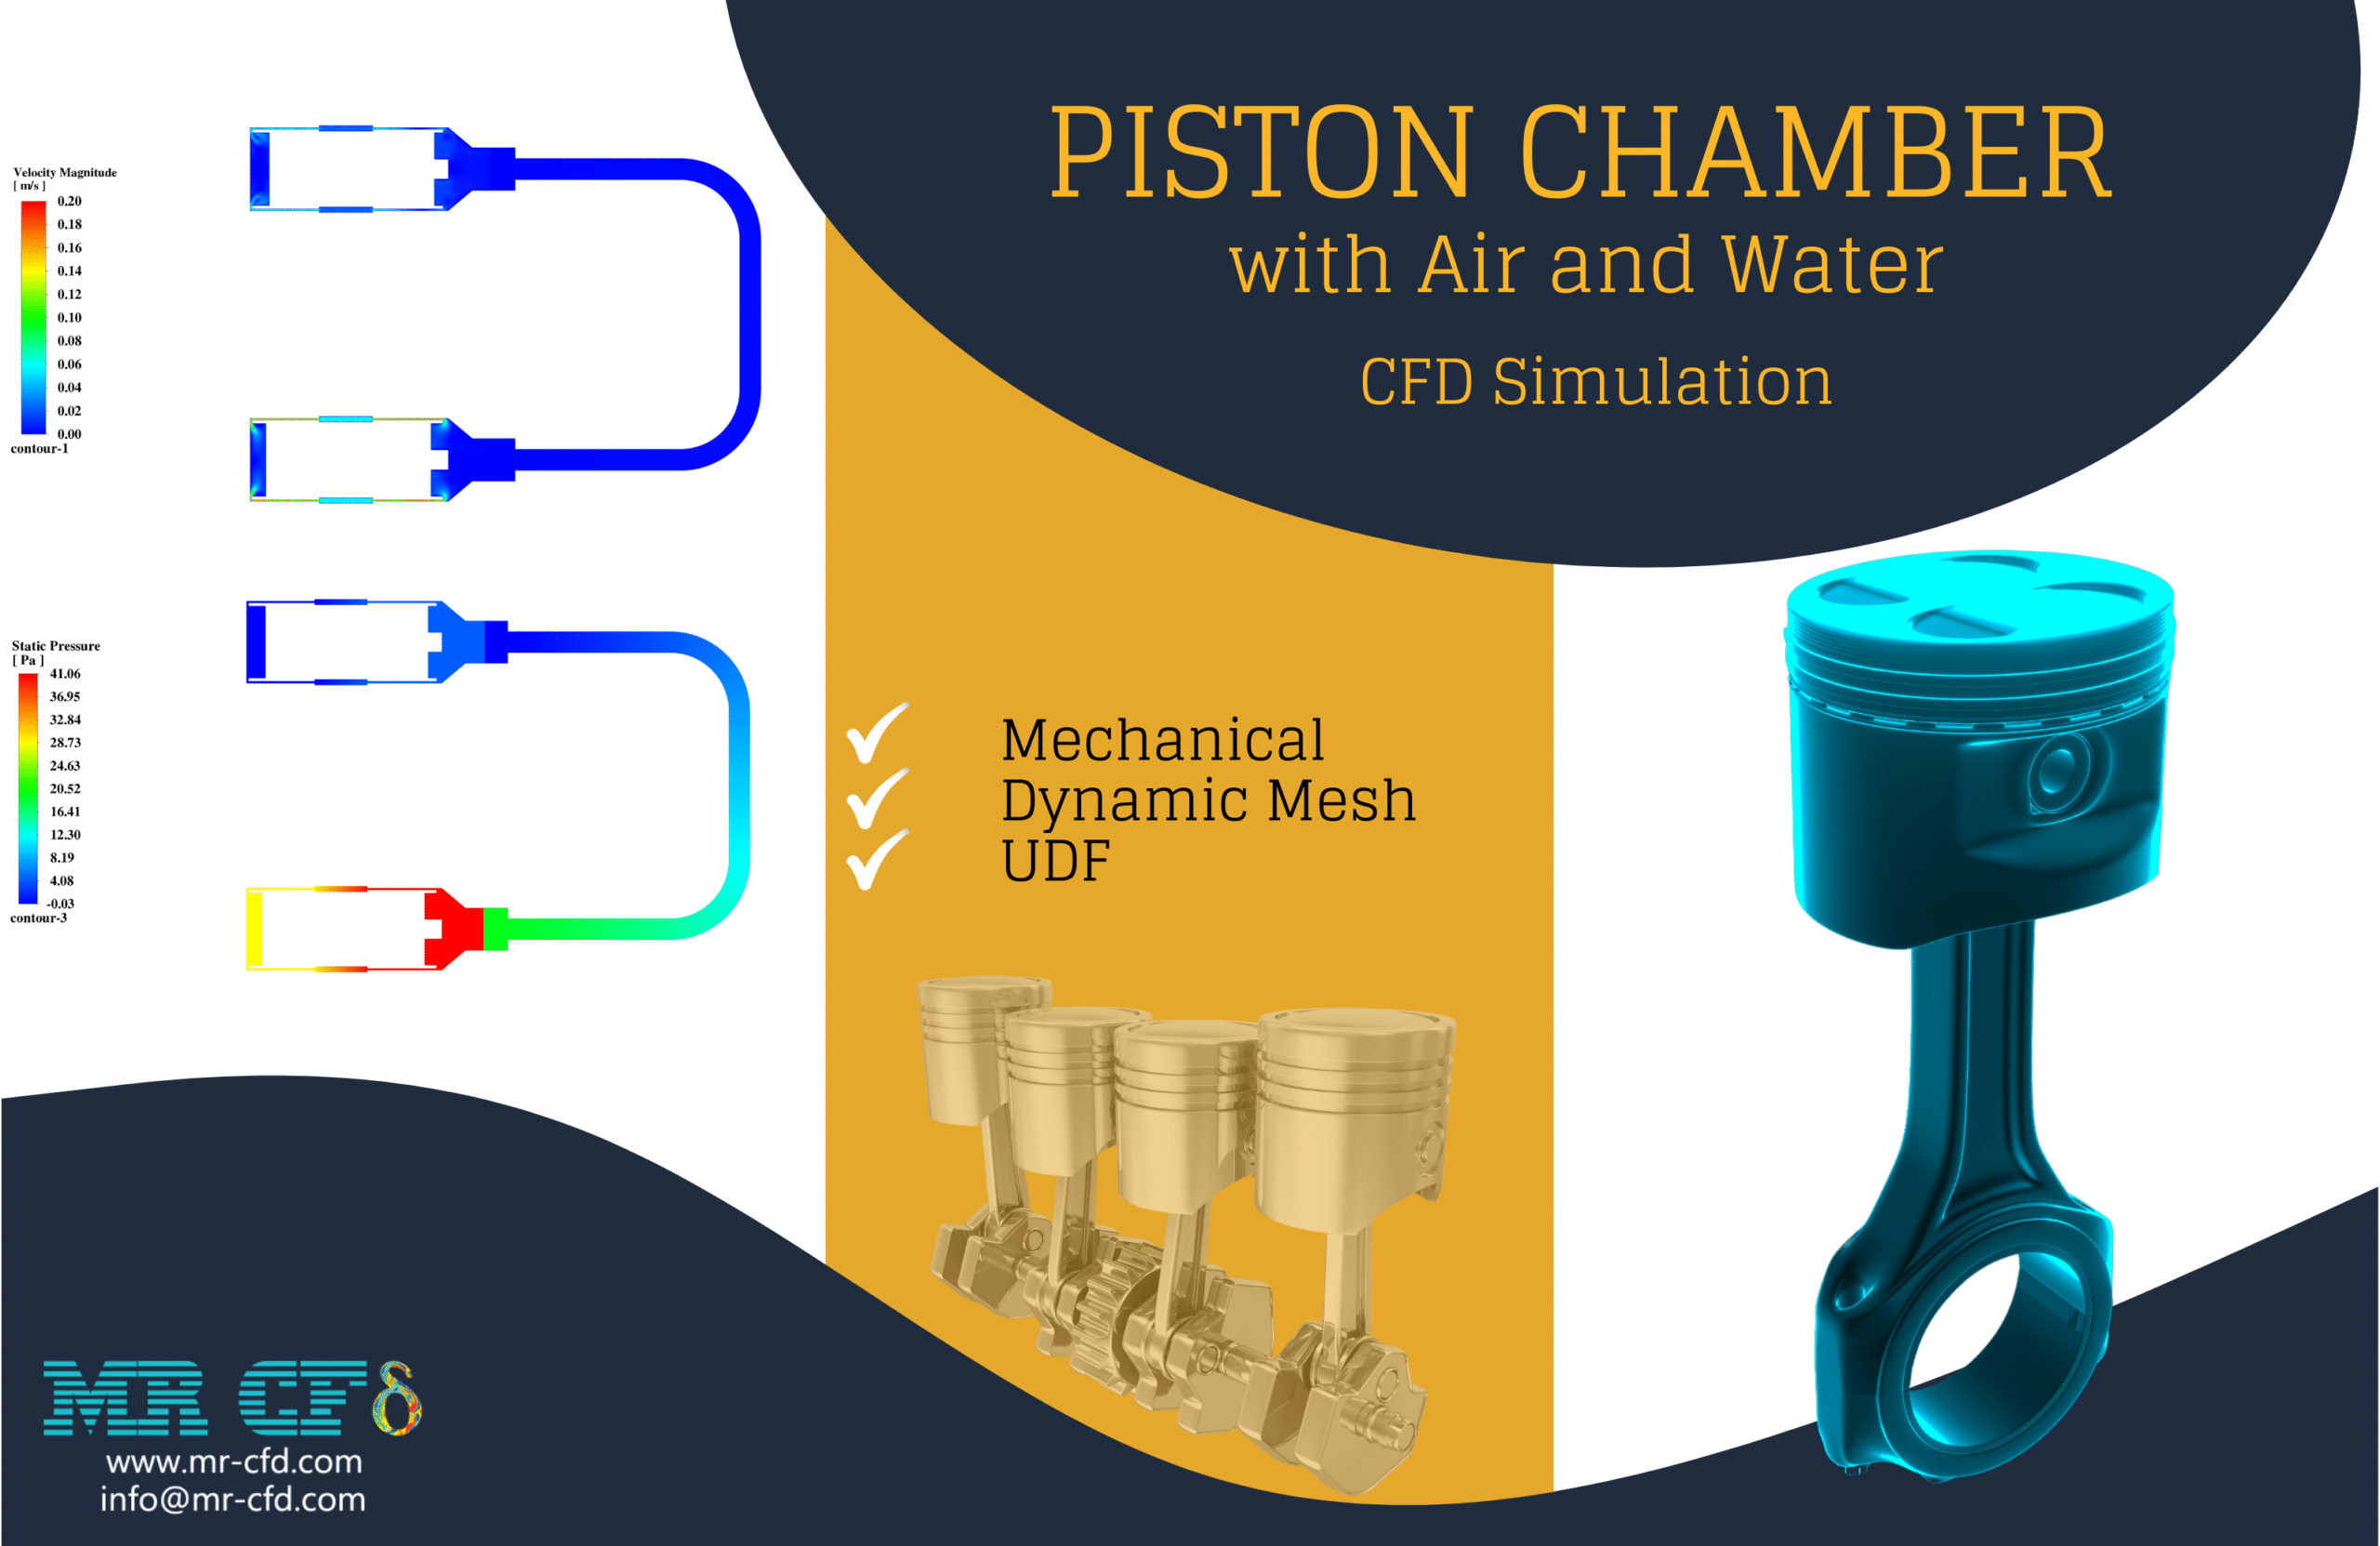 Piston Chamber with Air and Water CFD Simulation